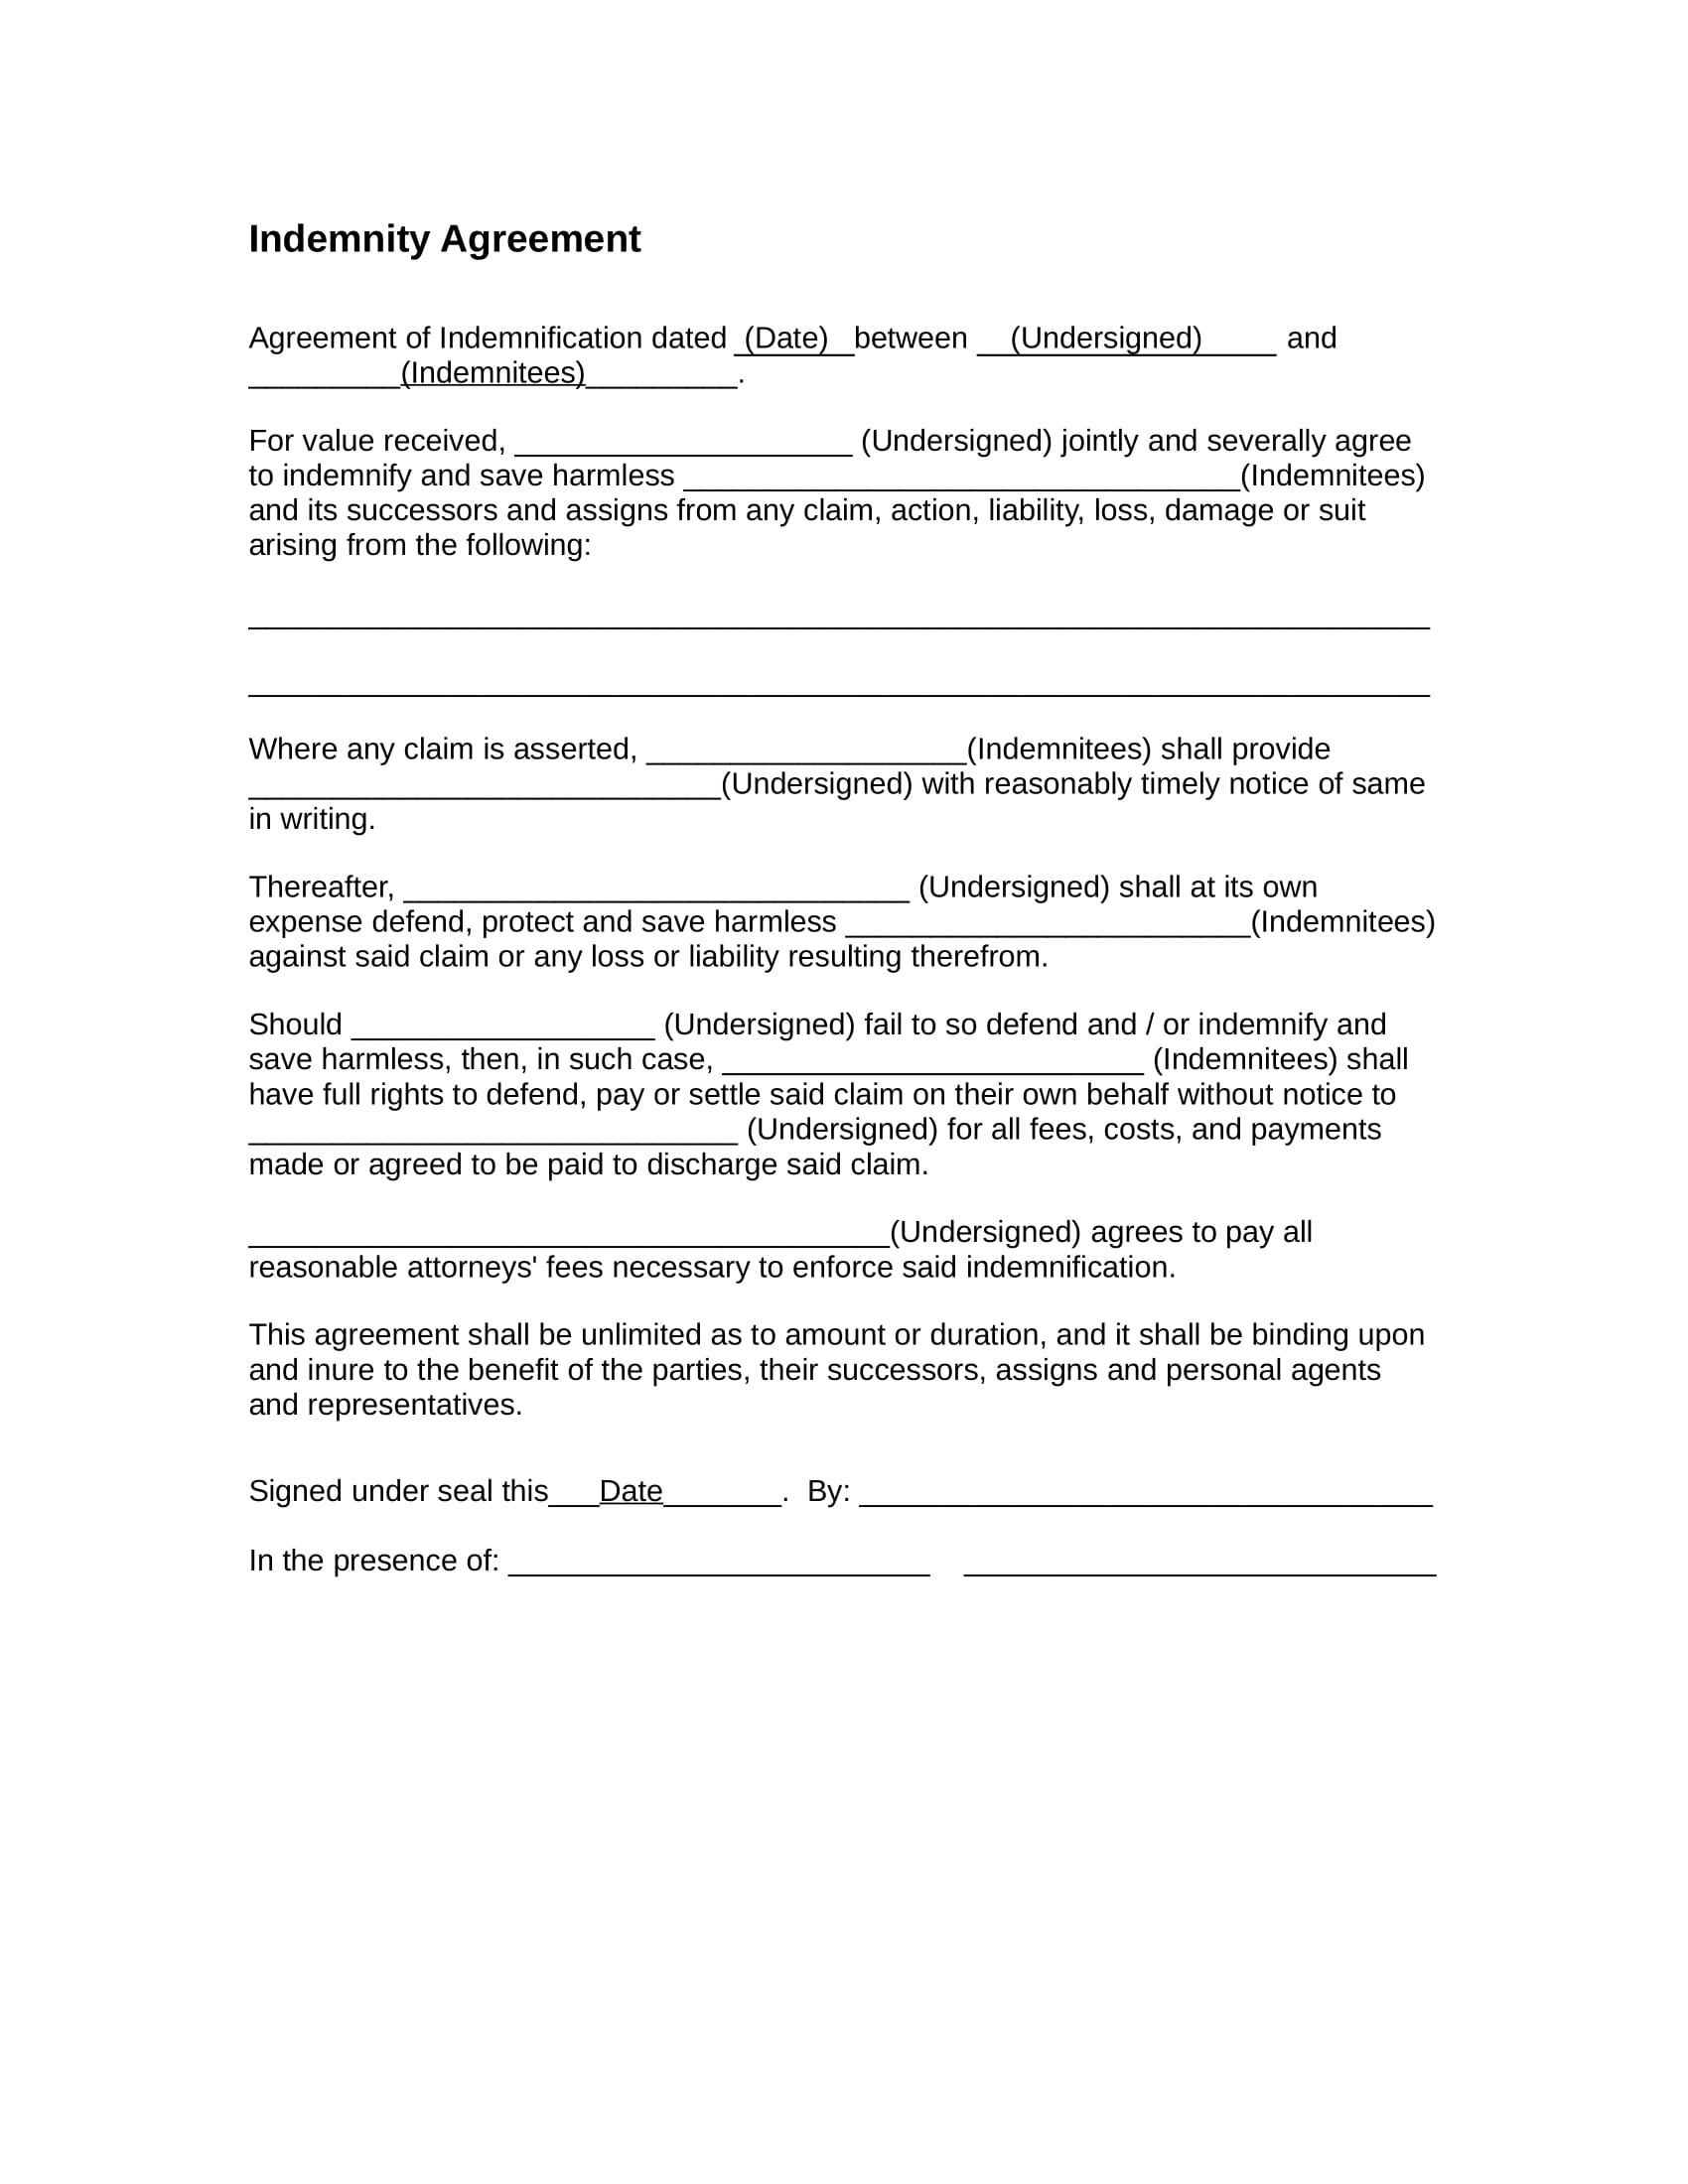 indemnity agreement contract form in doc 1